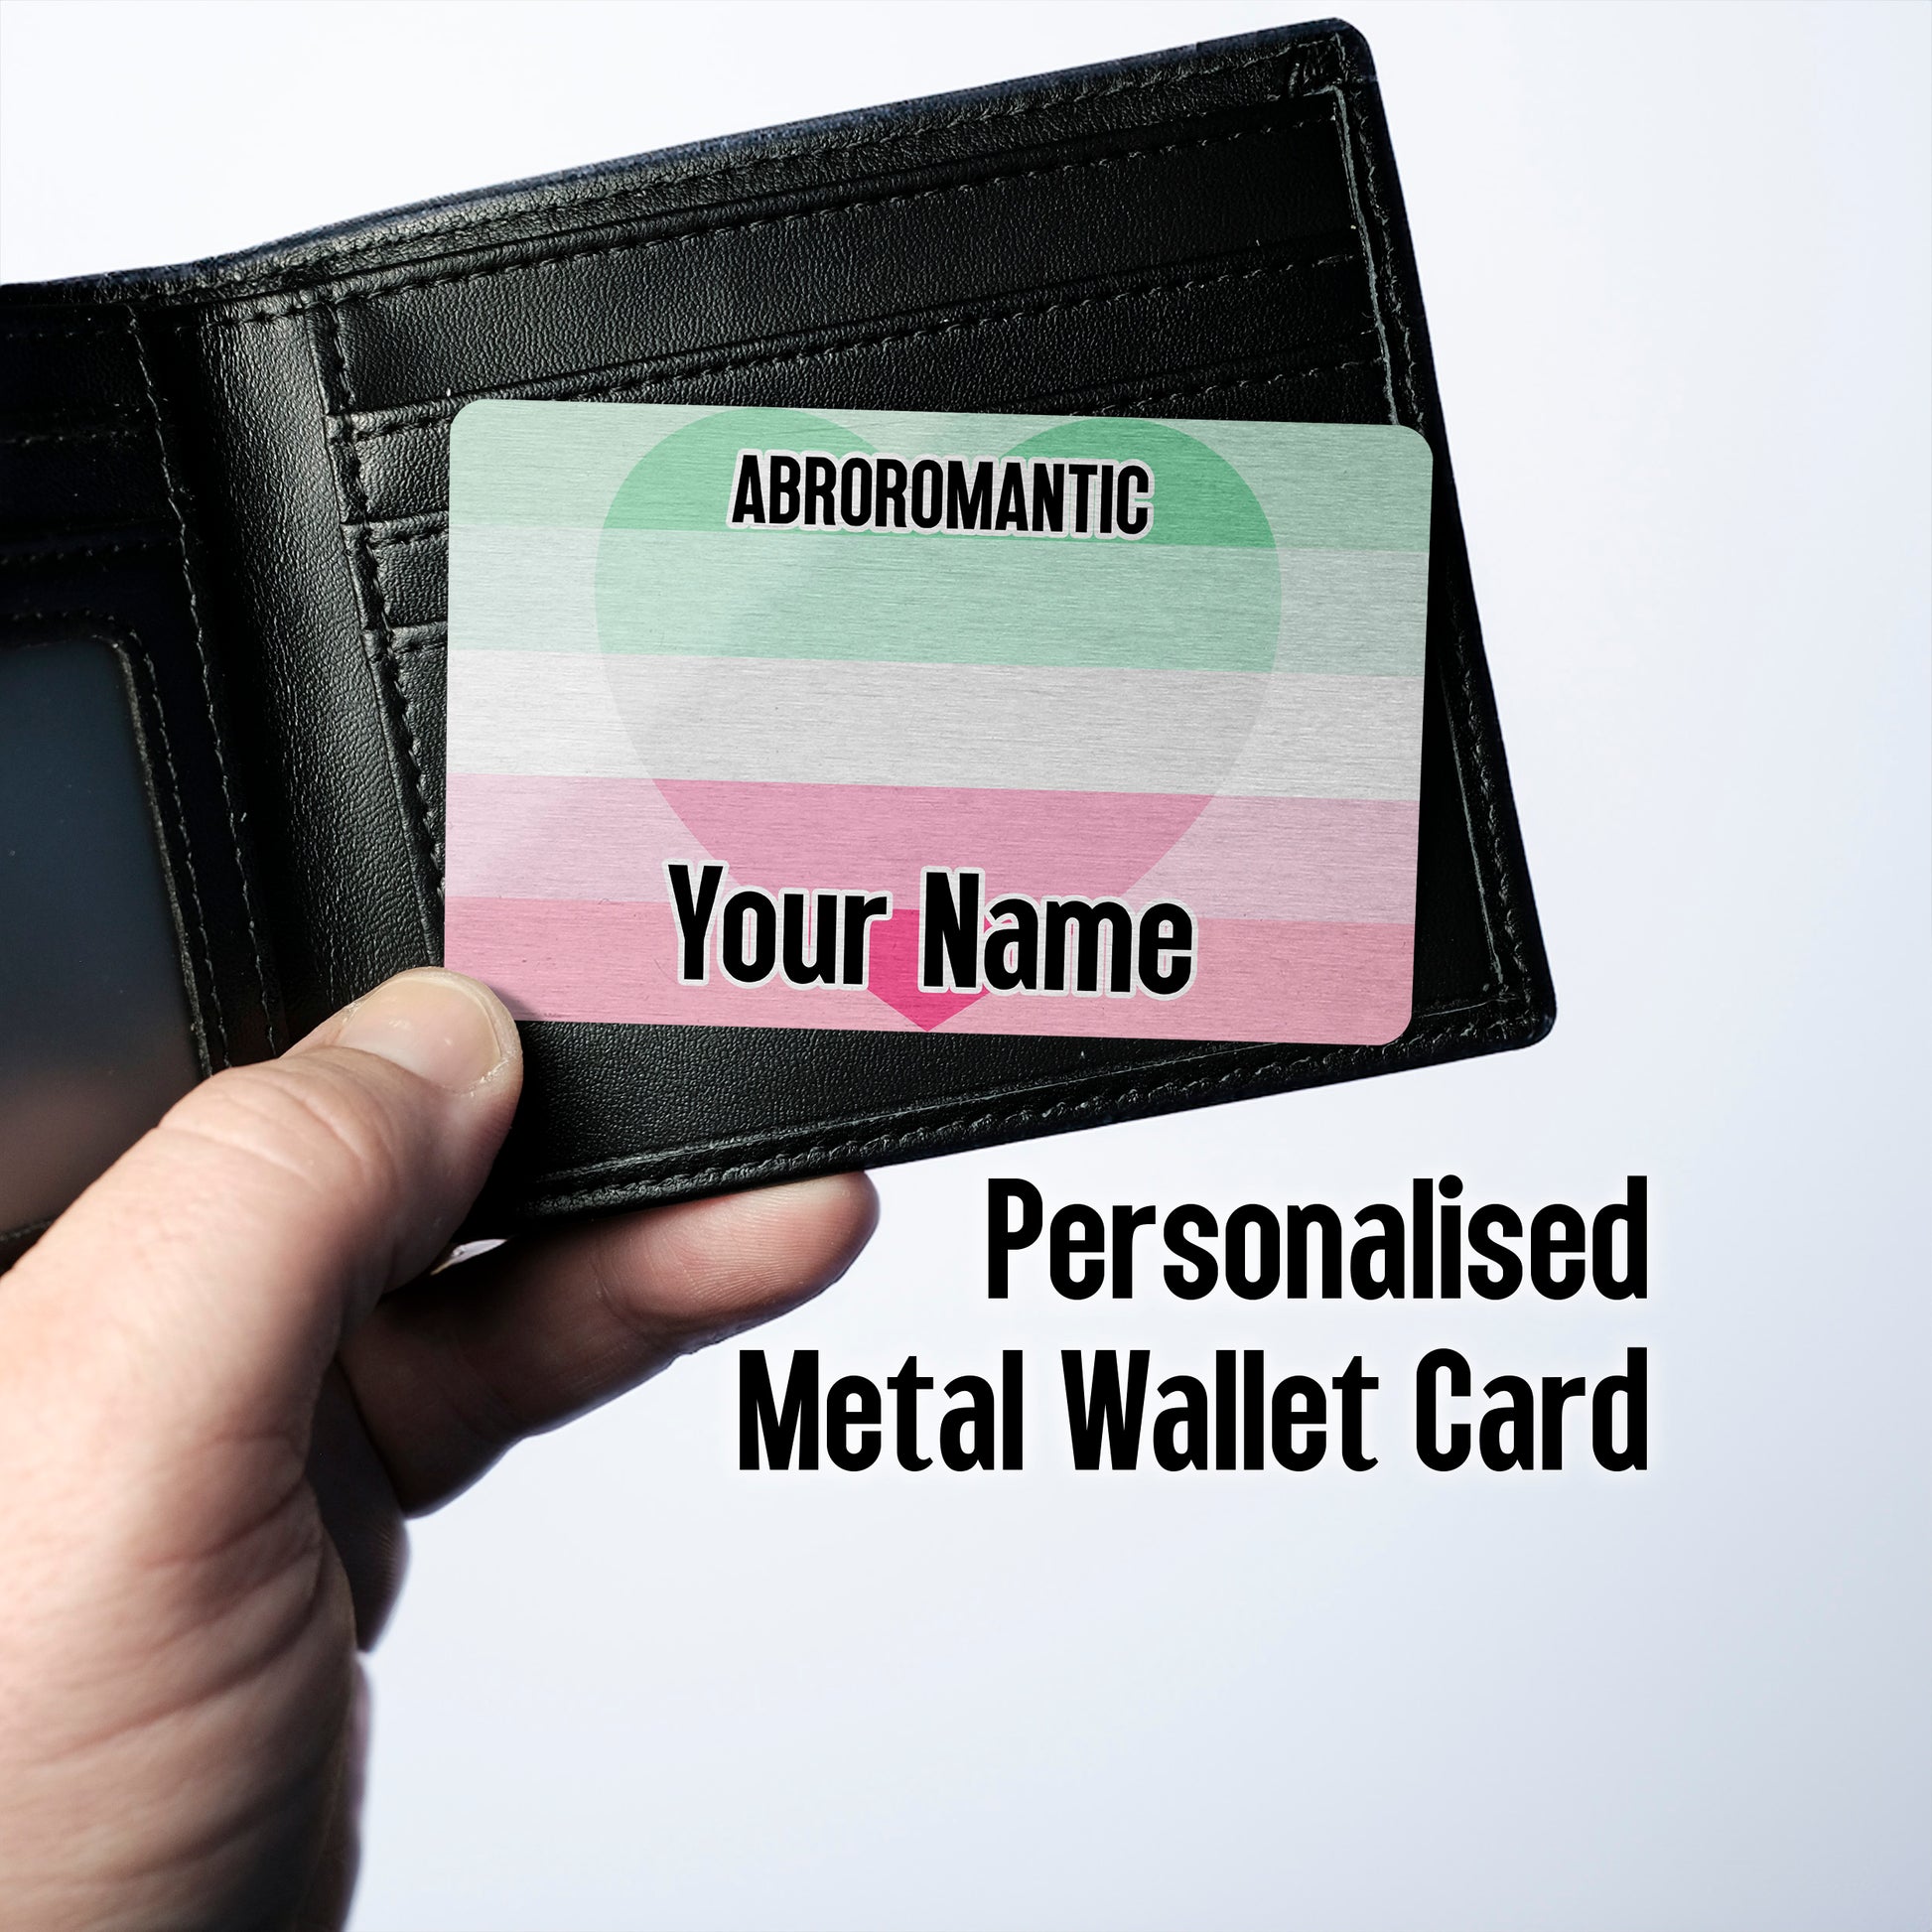 Aluminium metal wallet card personalised with your name and the abroromantic pride flag